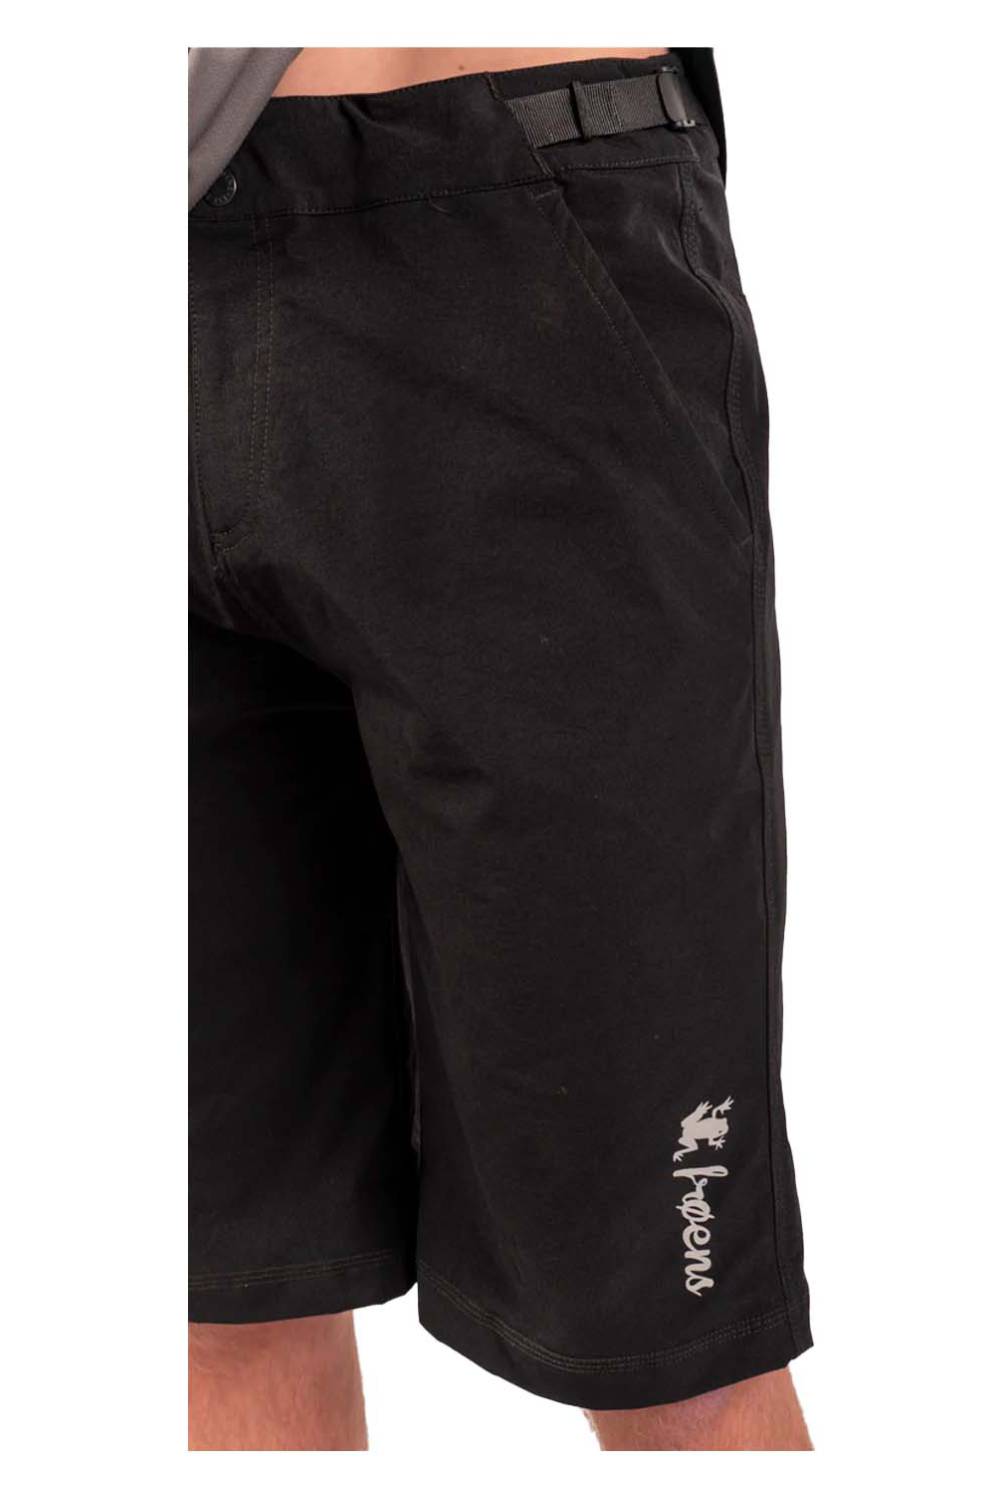 FROENS - Shorts Deportivo Ciclismo Hombre Froens